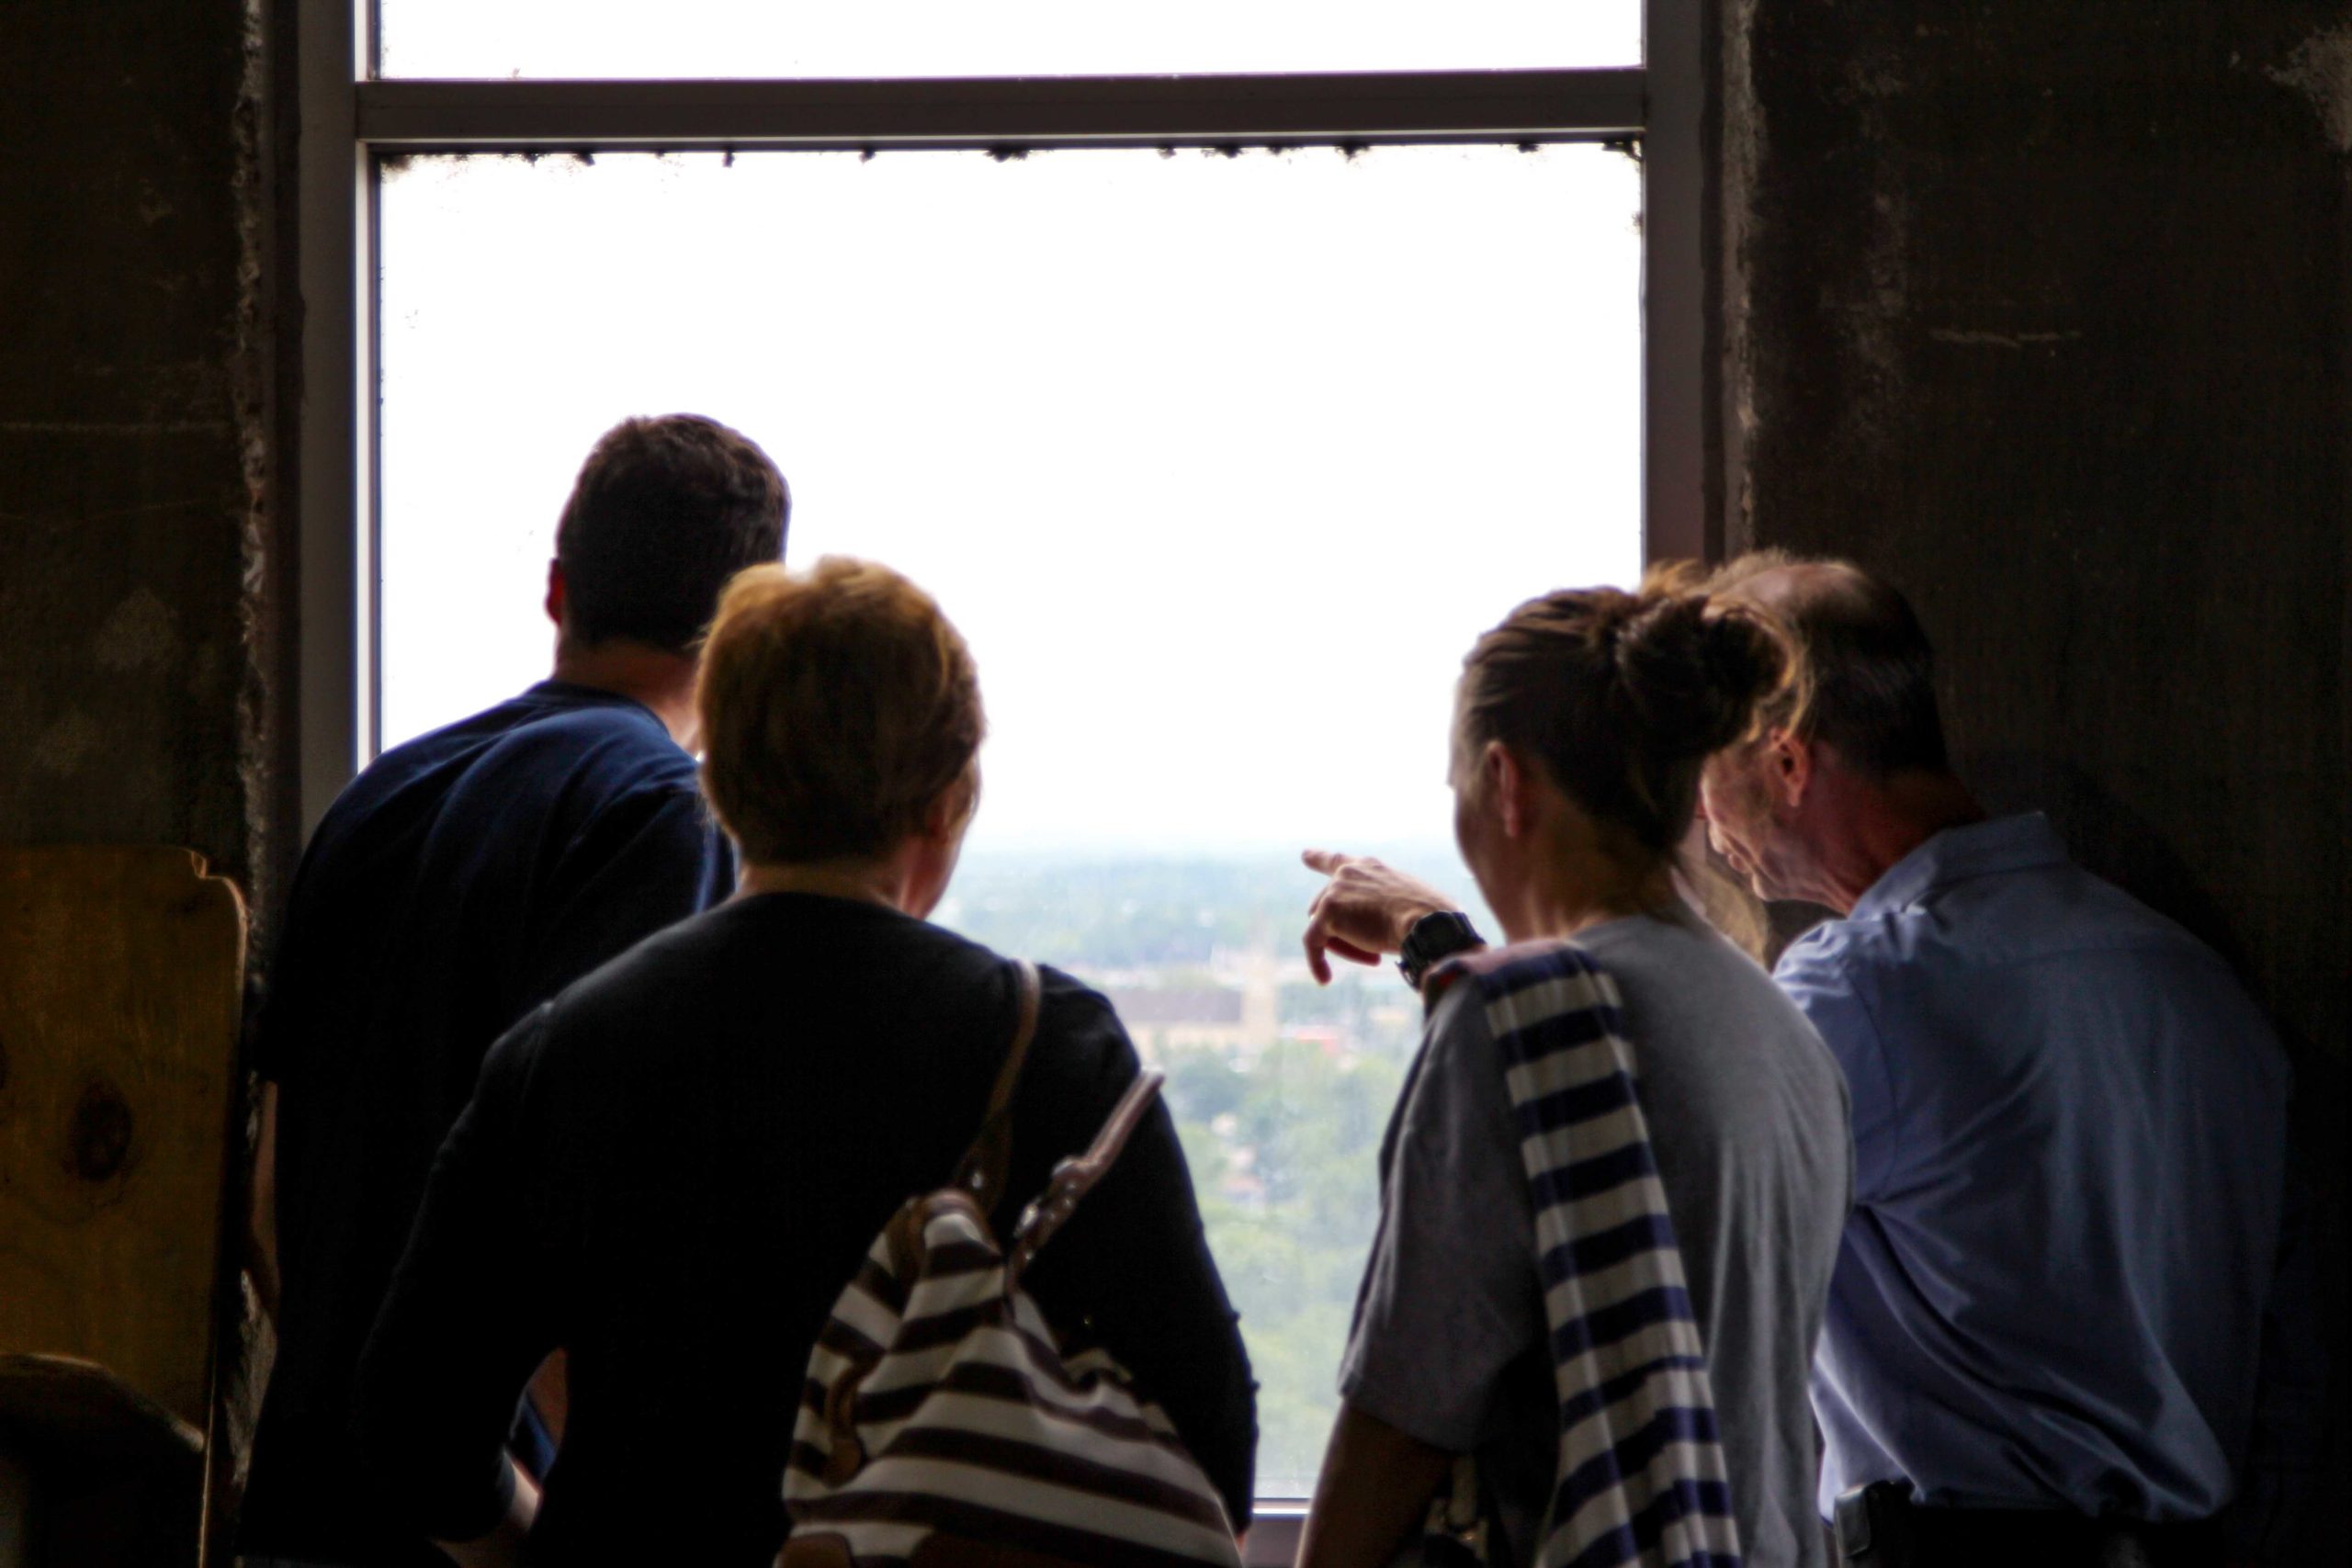 On Saturday, June 20, Briess also hosted the Manitowoc Operation Open House for our employees, with nearly 100 attendees. Employees and guests look out the windows of the 12th story of the Manitowoc Grain Elevator viewing the city of Manitowoc below.  